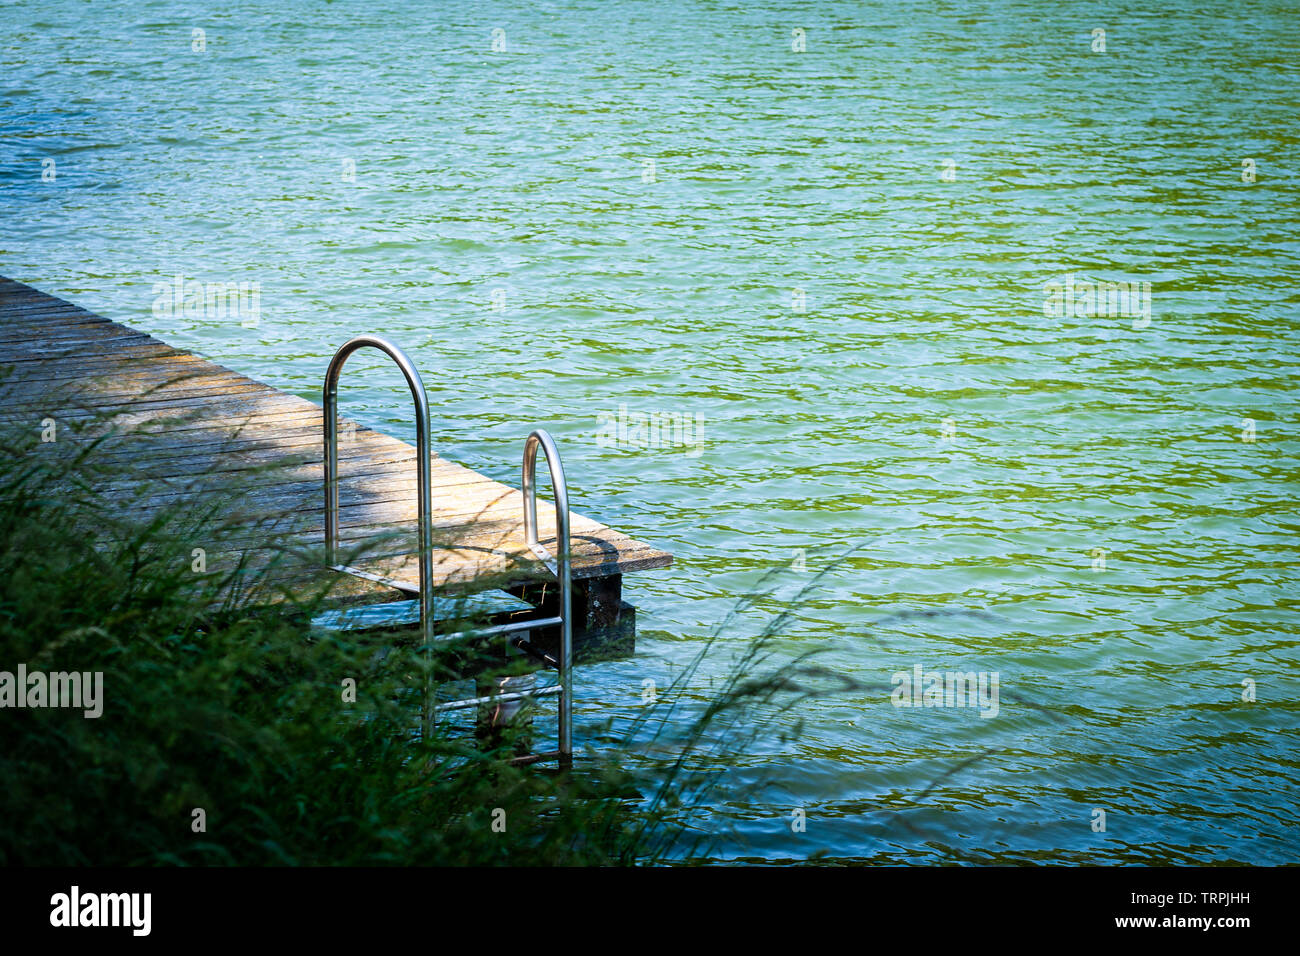 Old wooden pier with metal ladder into the lake Stock Photo